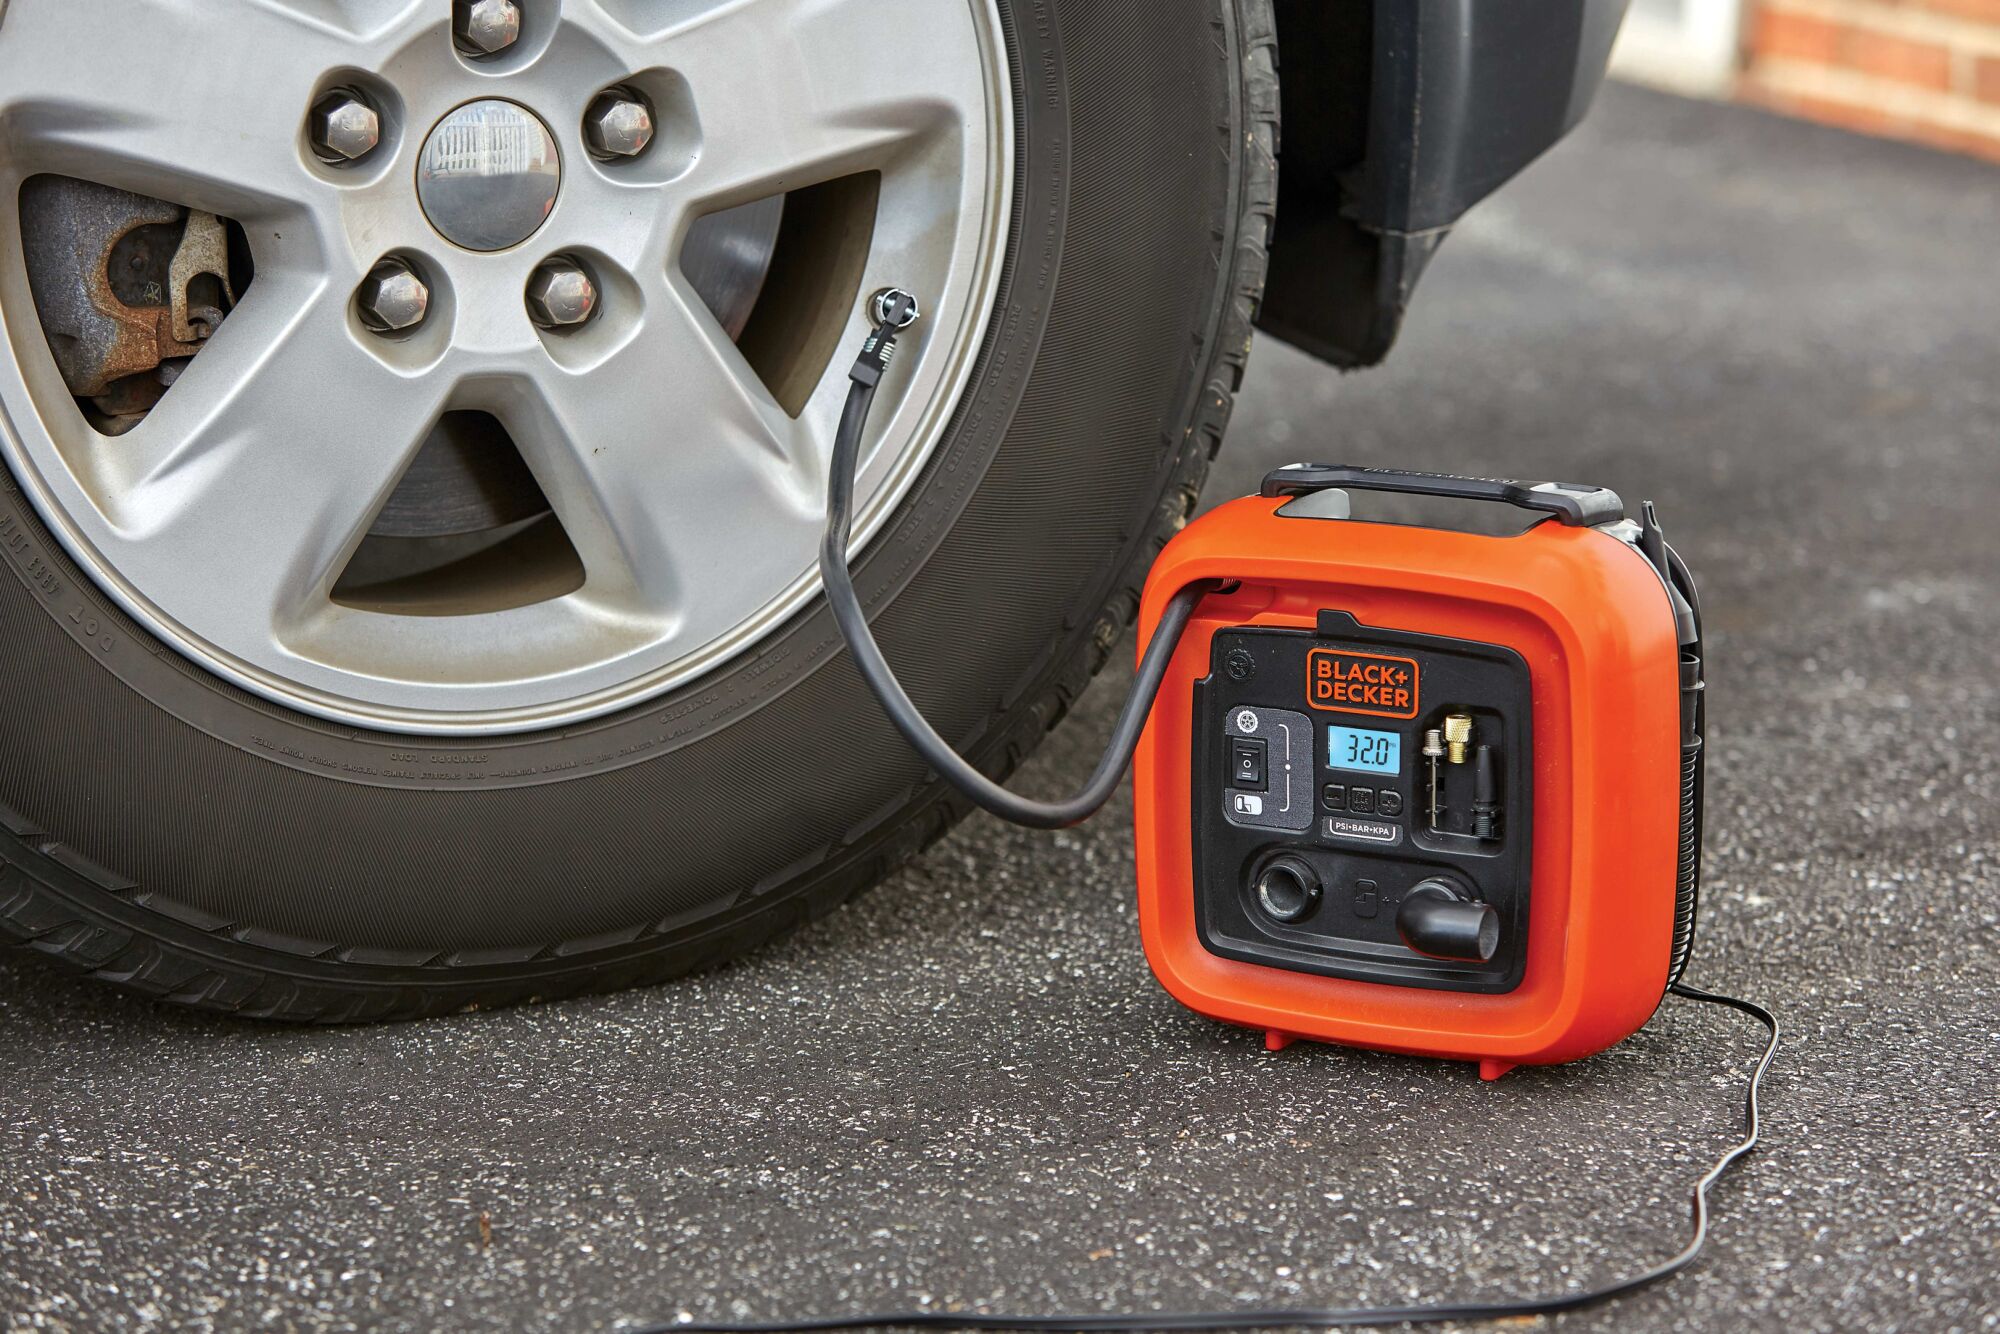 12 volt D C multi purpose inflator being used to inflate car tire.